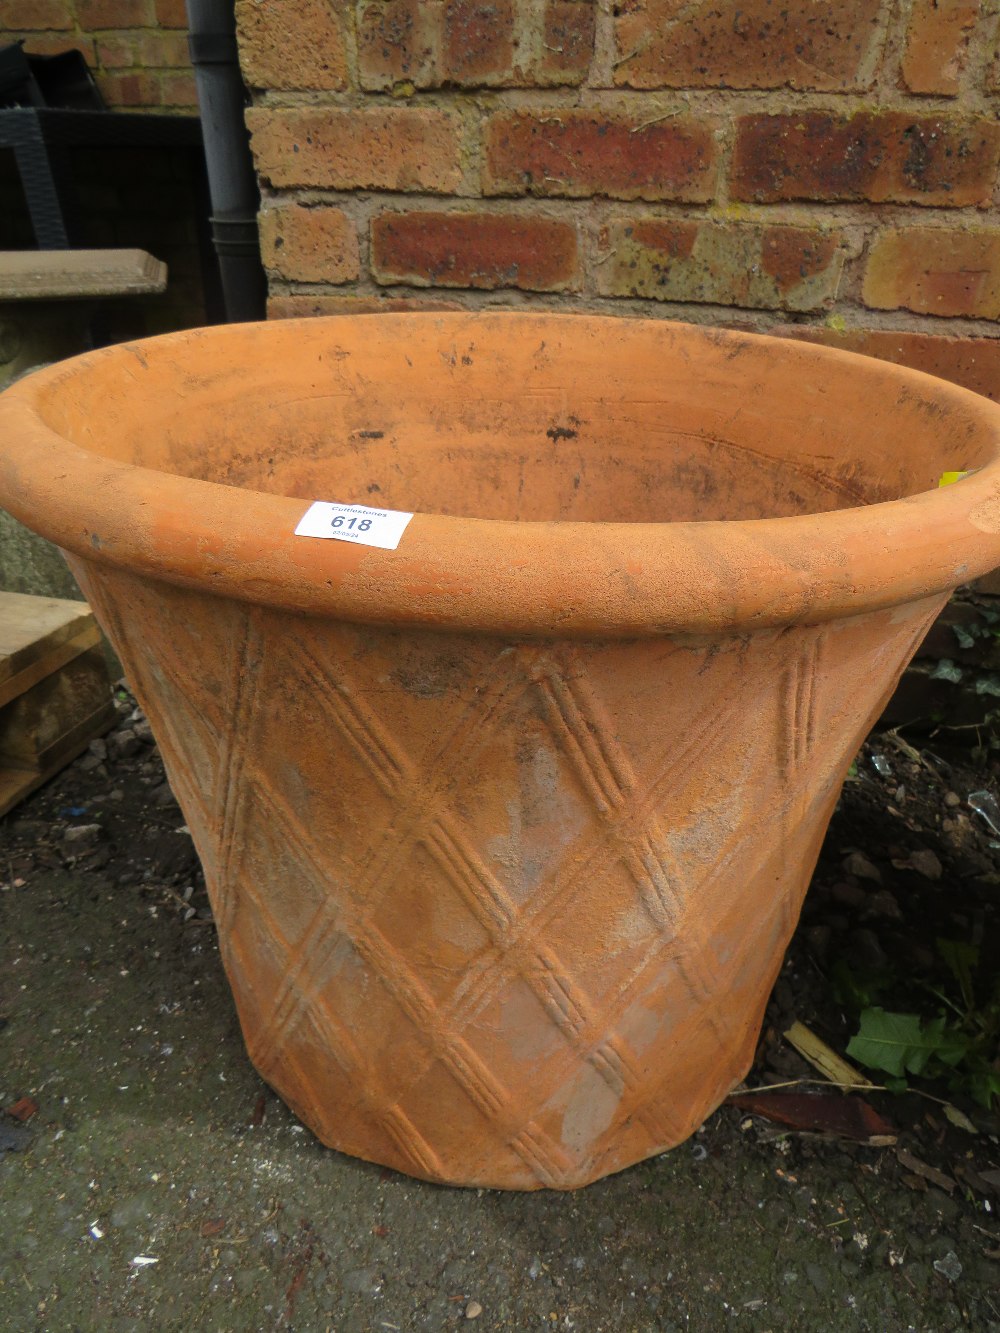 A PAIR OF EXTRA LARGE TERRACOTTA GARDEN PLANTERS - Image 3 of 8